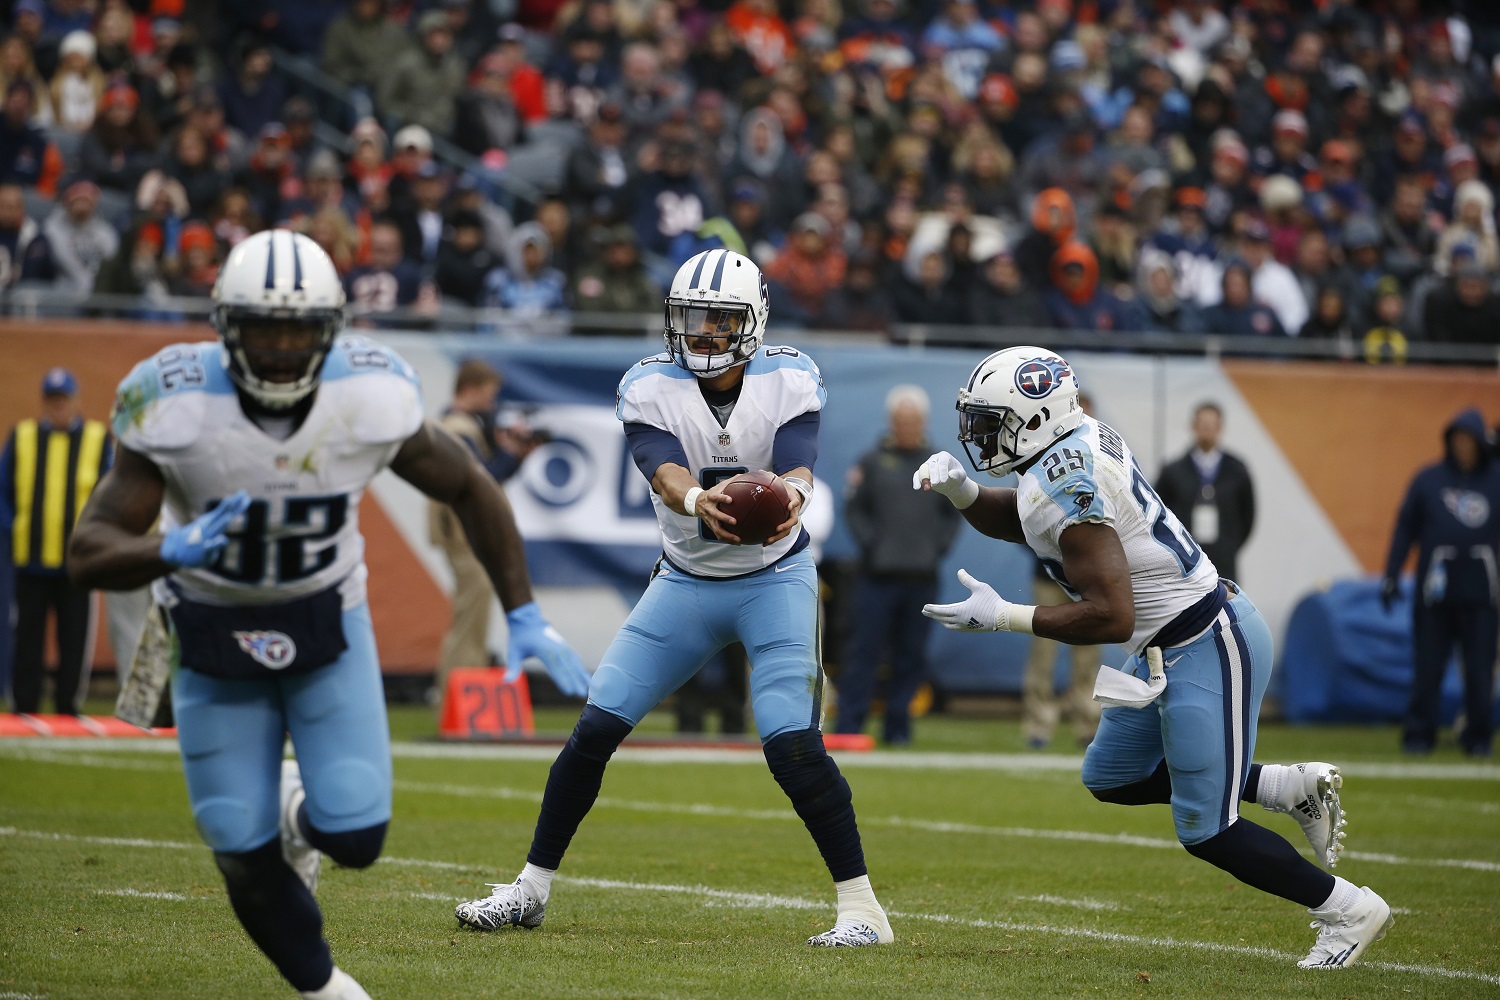 Tennessee Titans quarterback Marcus Mariota (8) hands off the ball to running back DeMarco Murray (29) during the first half of an NFL football game against the Chicago Bears, Sunday, Nov. 27, 2016, in Chicago. (AP Photo/Nam Y. Huh)